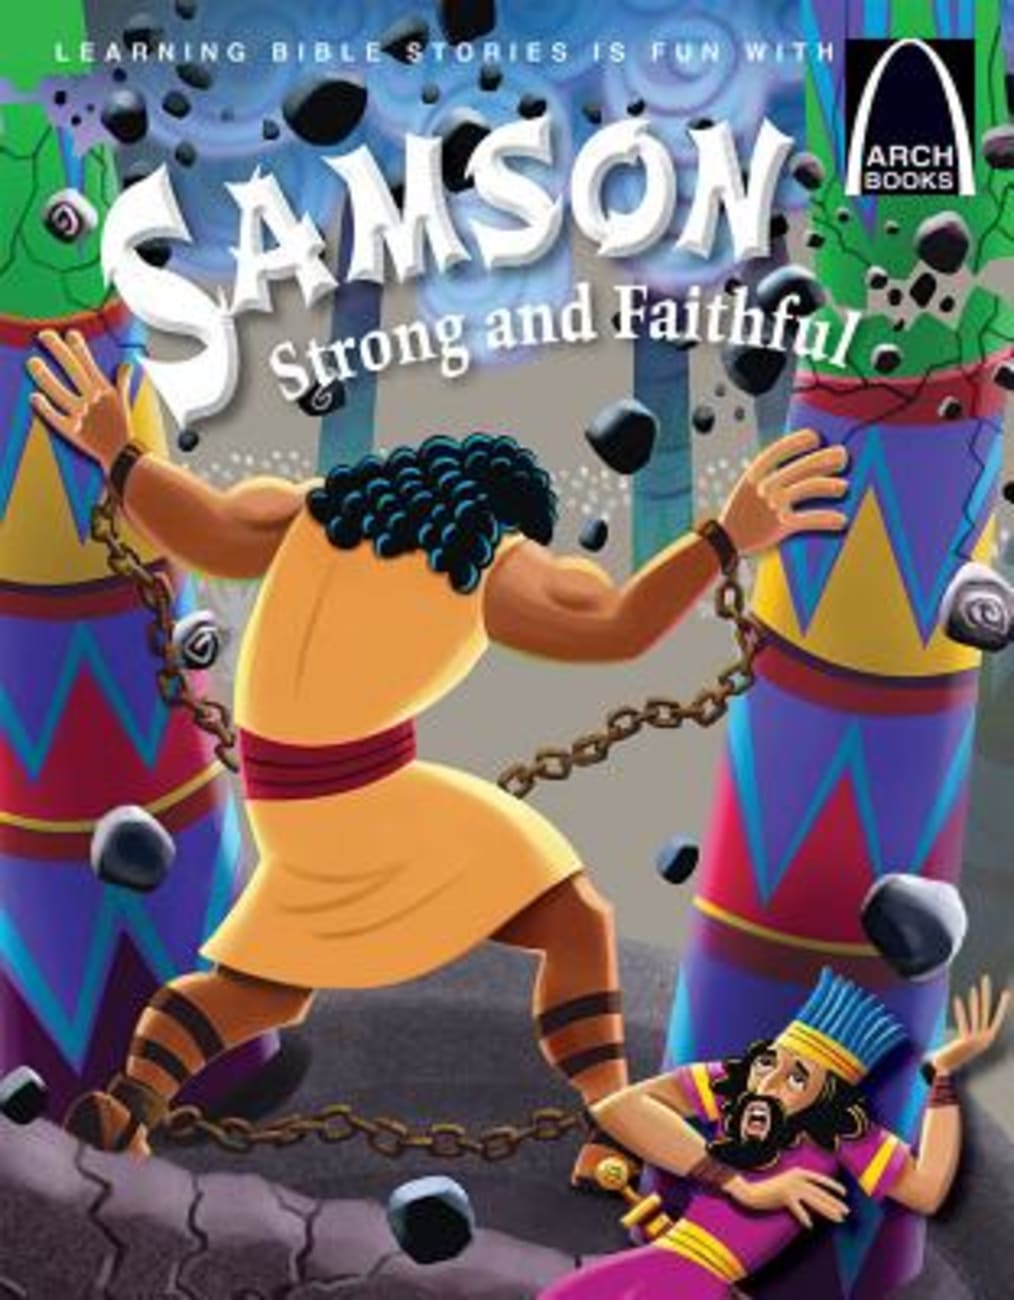 Samson, Strong and Faithful (Arch Books Series) Paperback